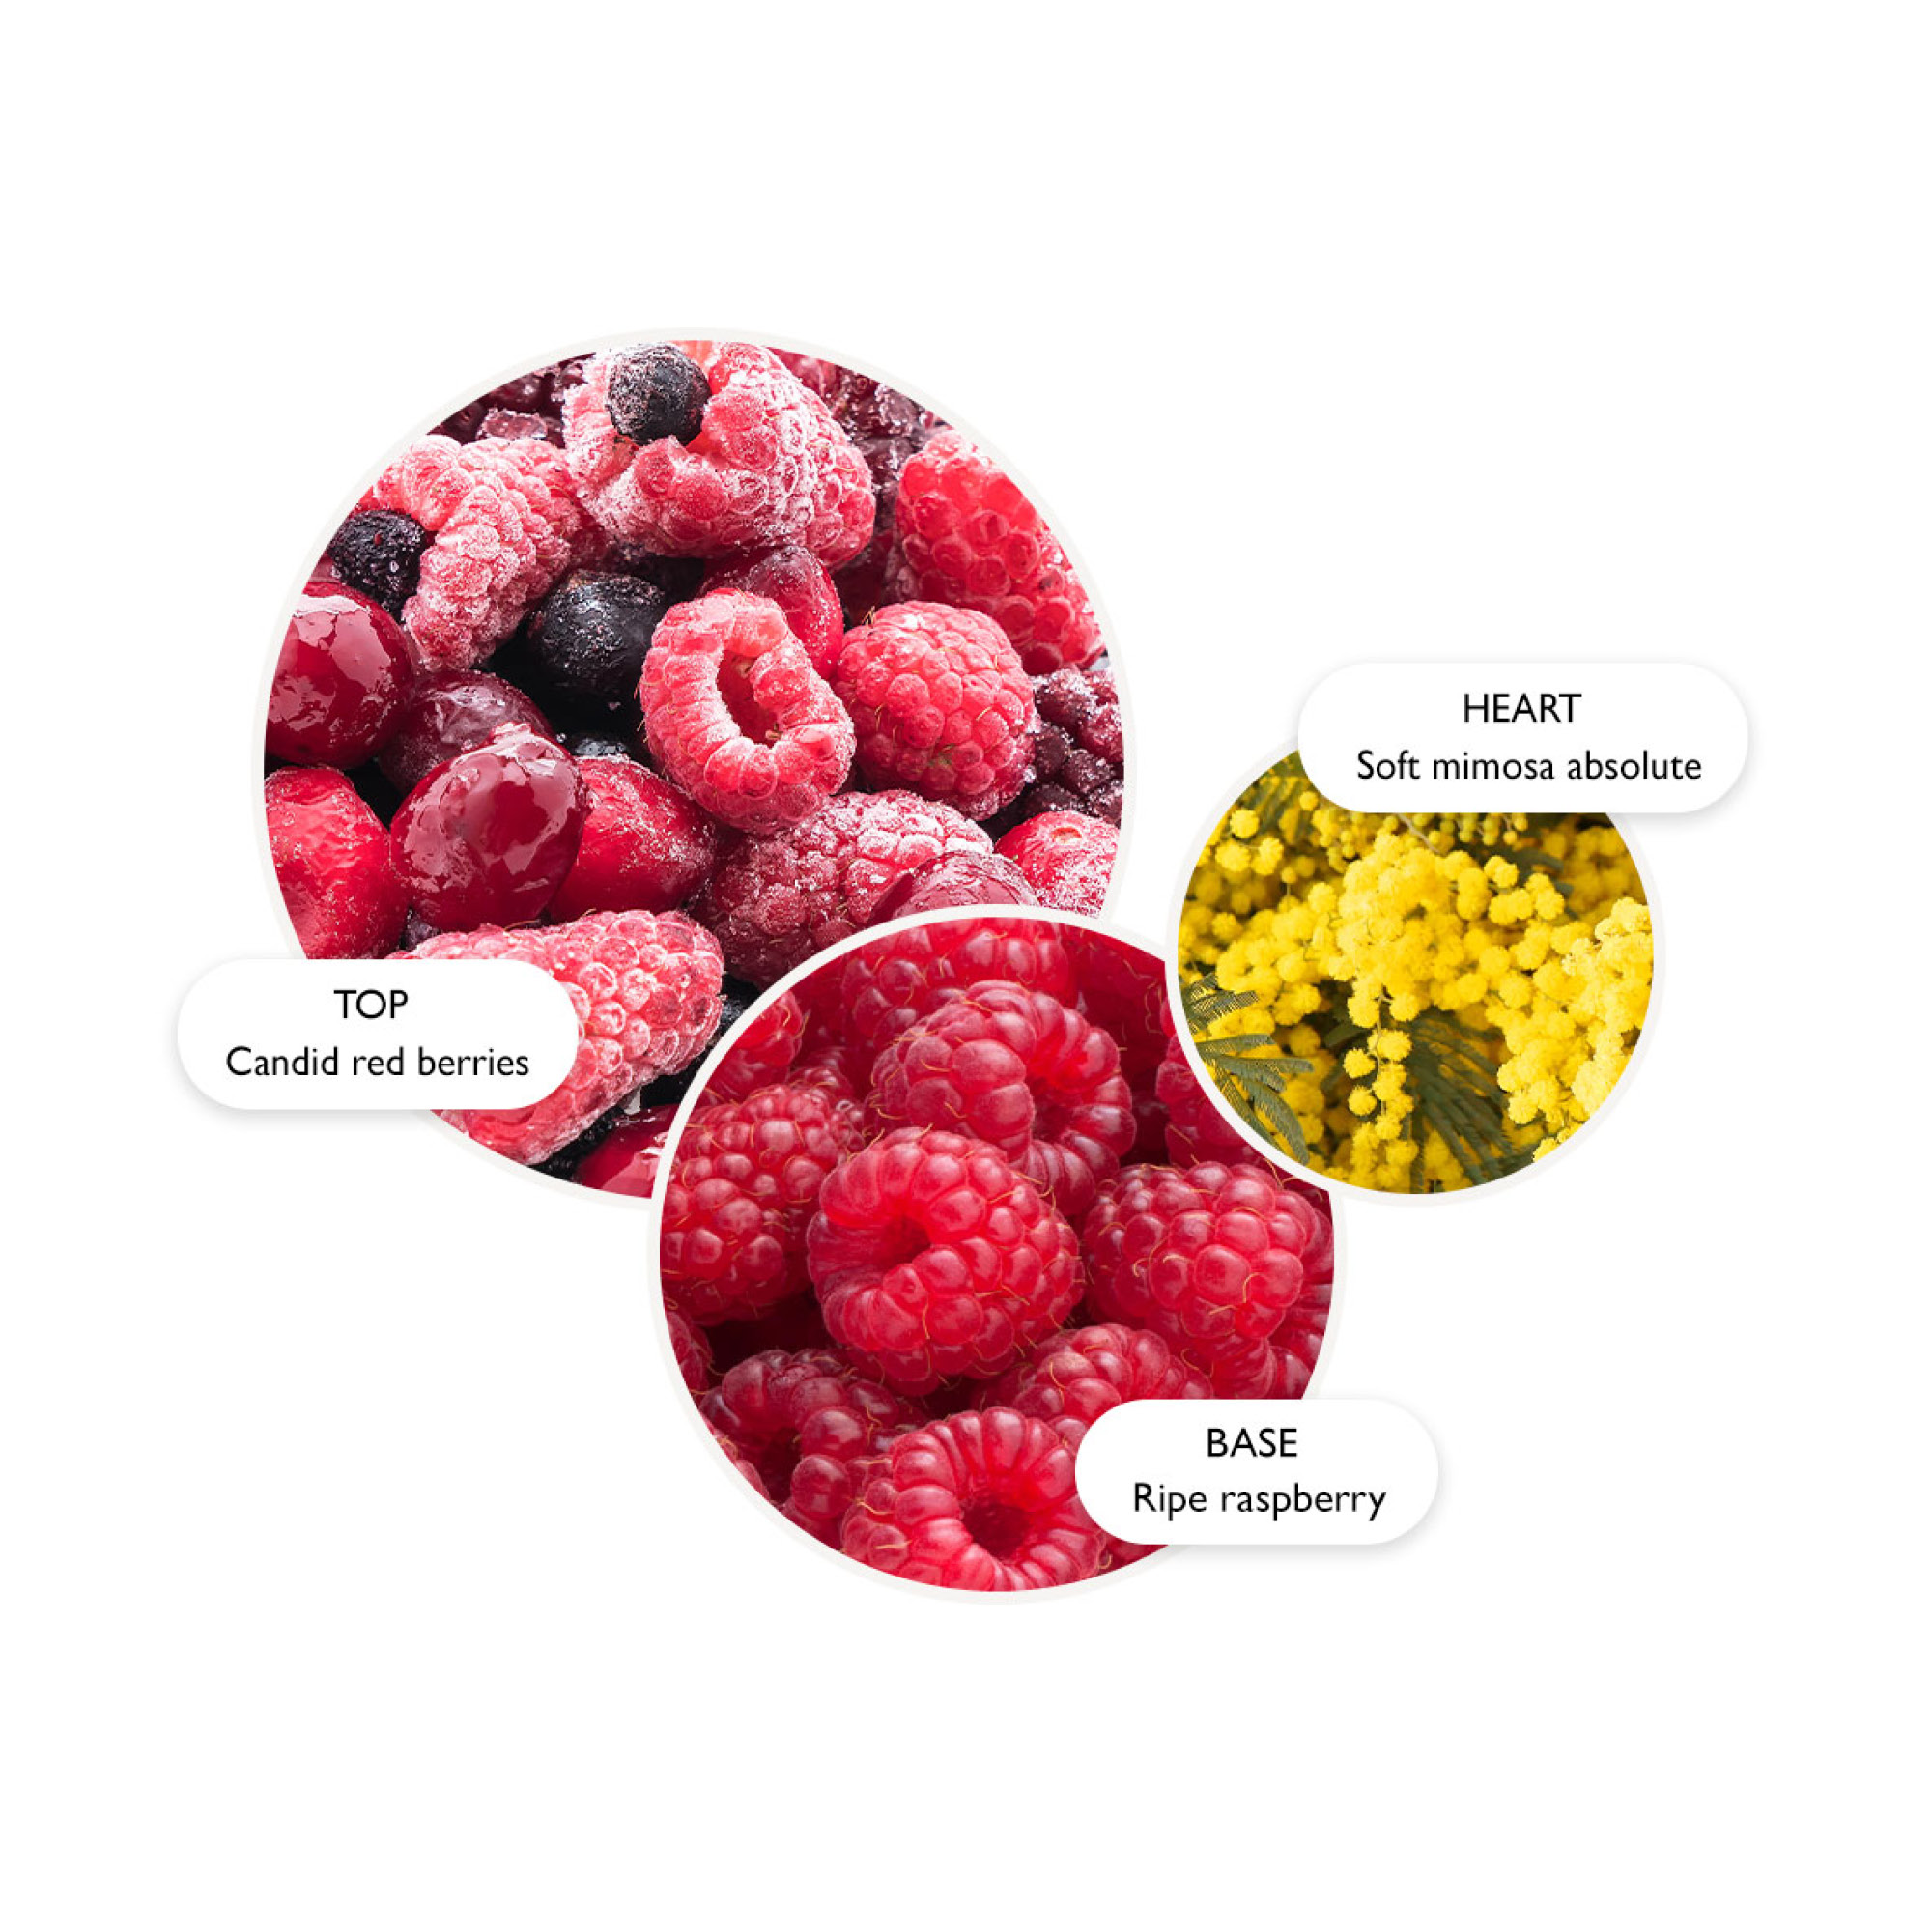 TOP Candid red berries, HEART Soft mimosa absolute, BASE Ripe raspberry